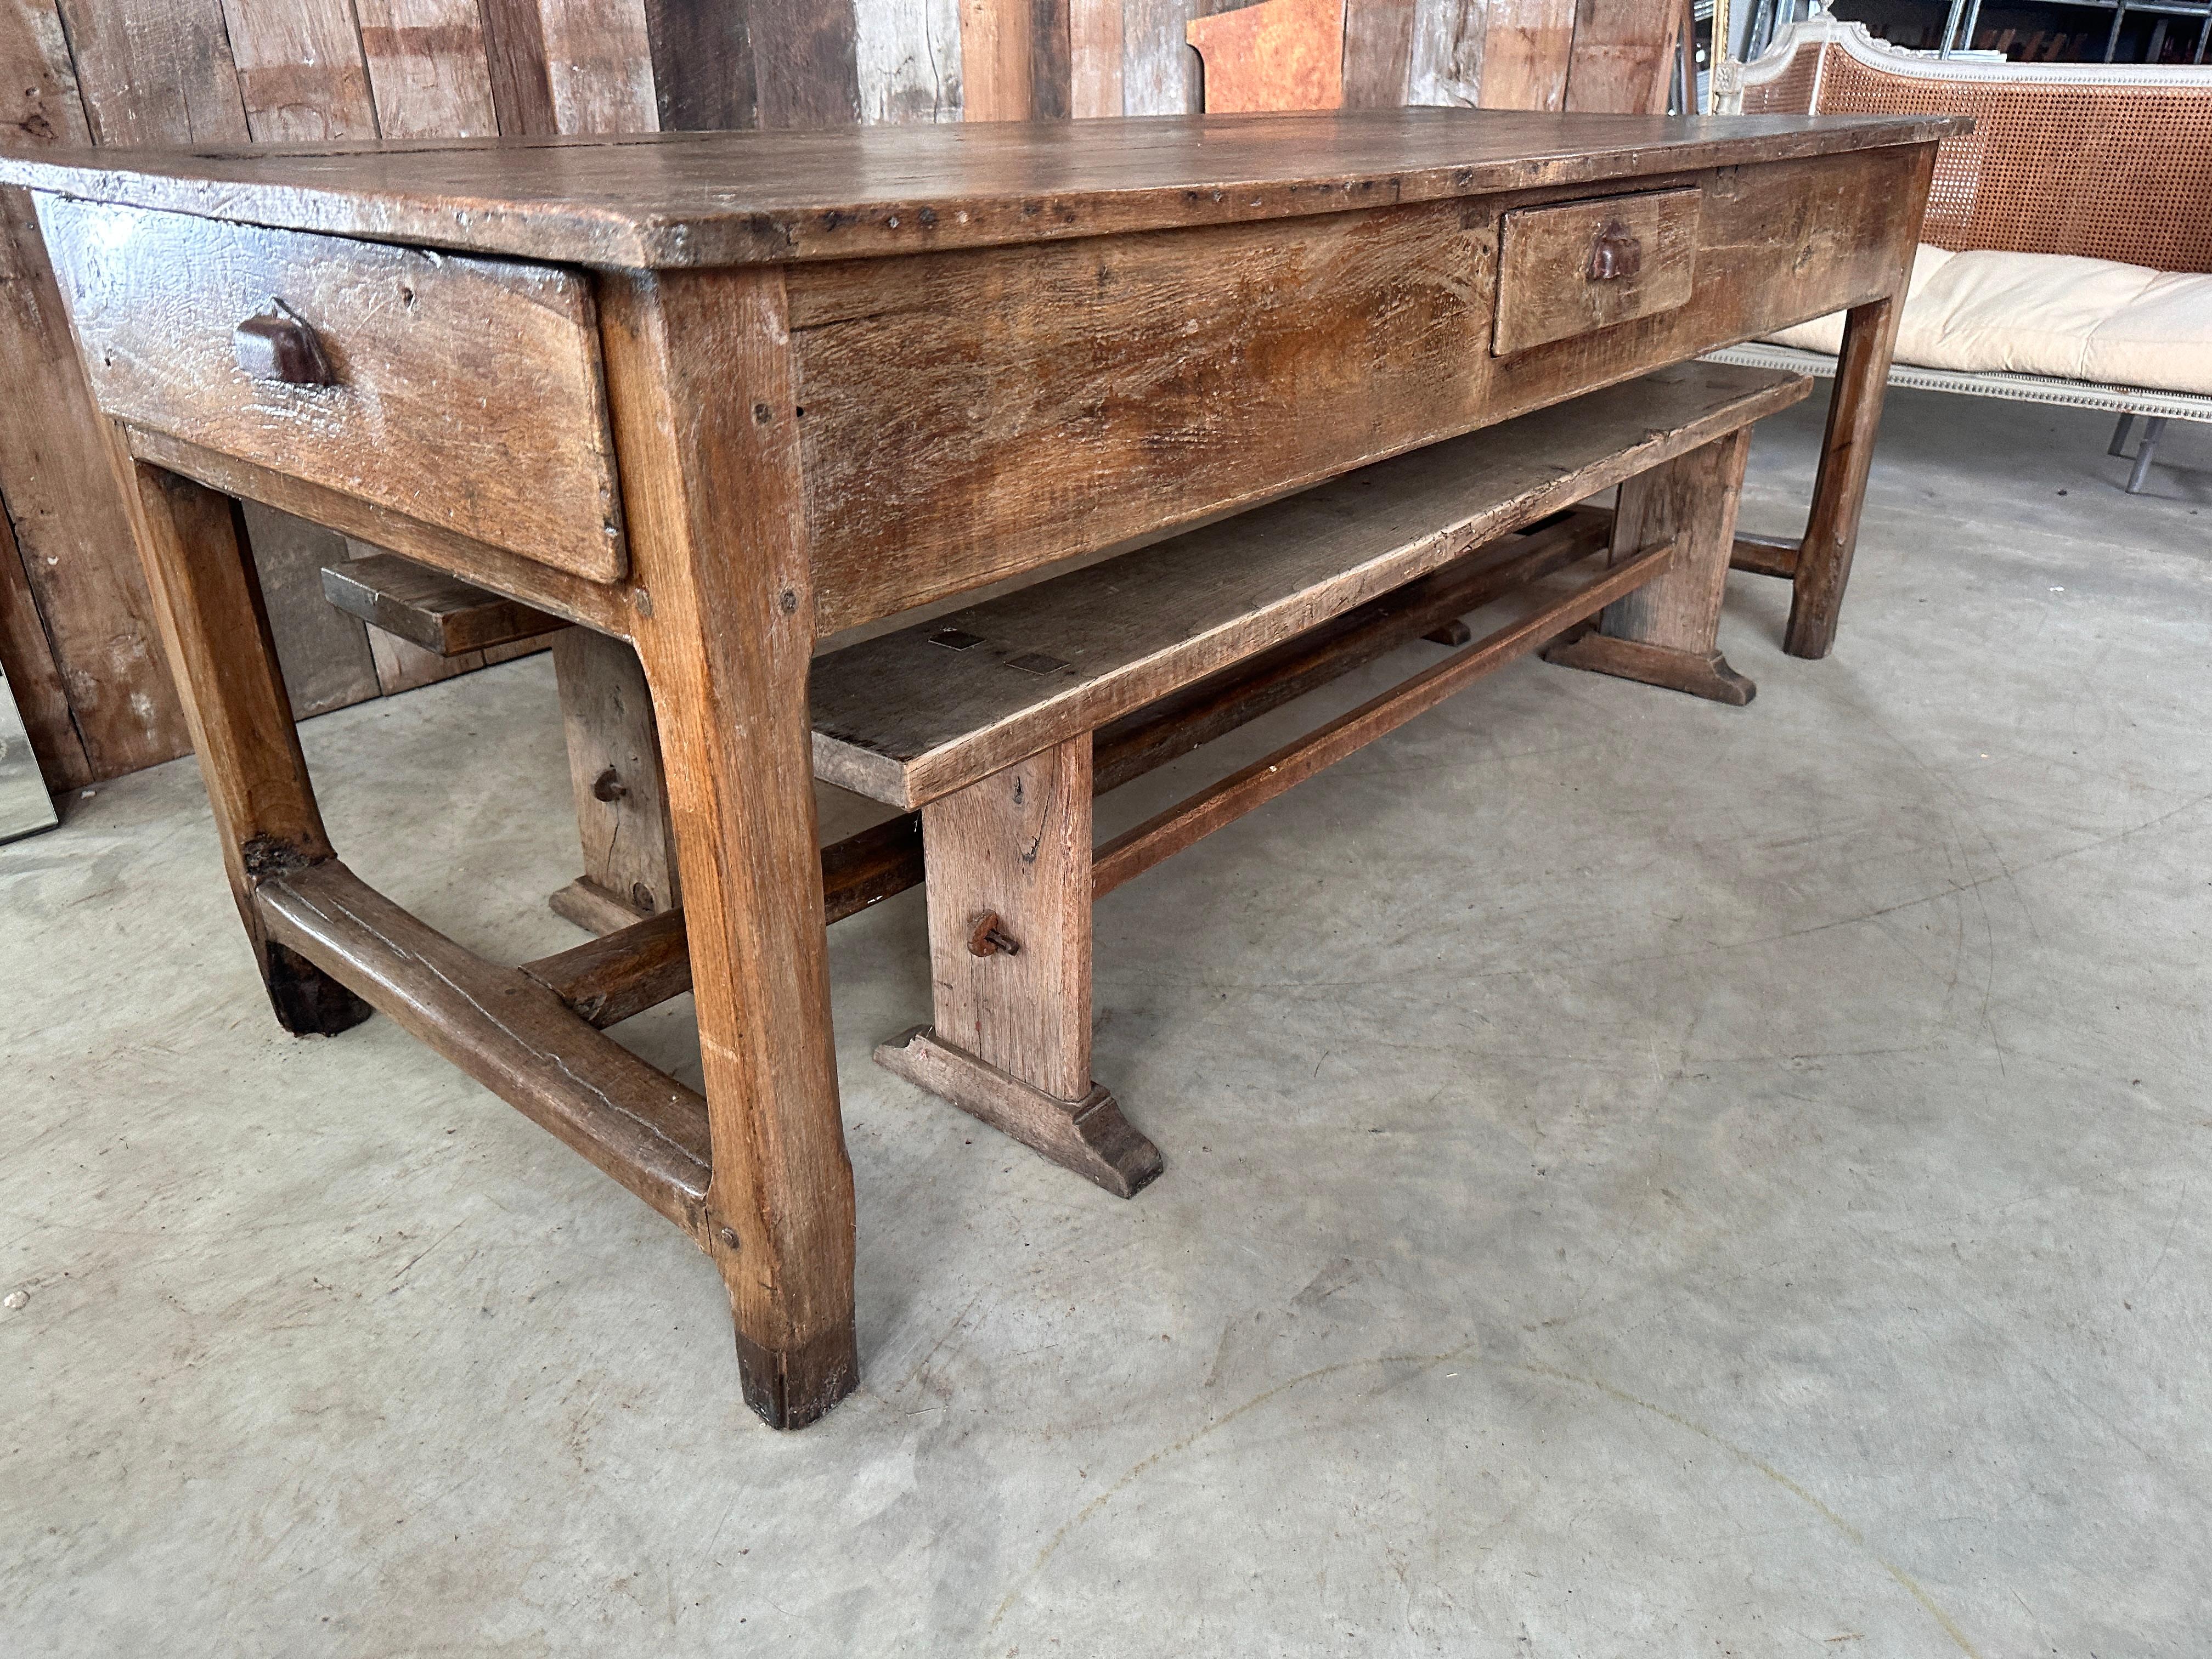 Antique French Chestnut Farmhouse Dordogne Refectory Dining Table and Benches For Sale 14